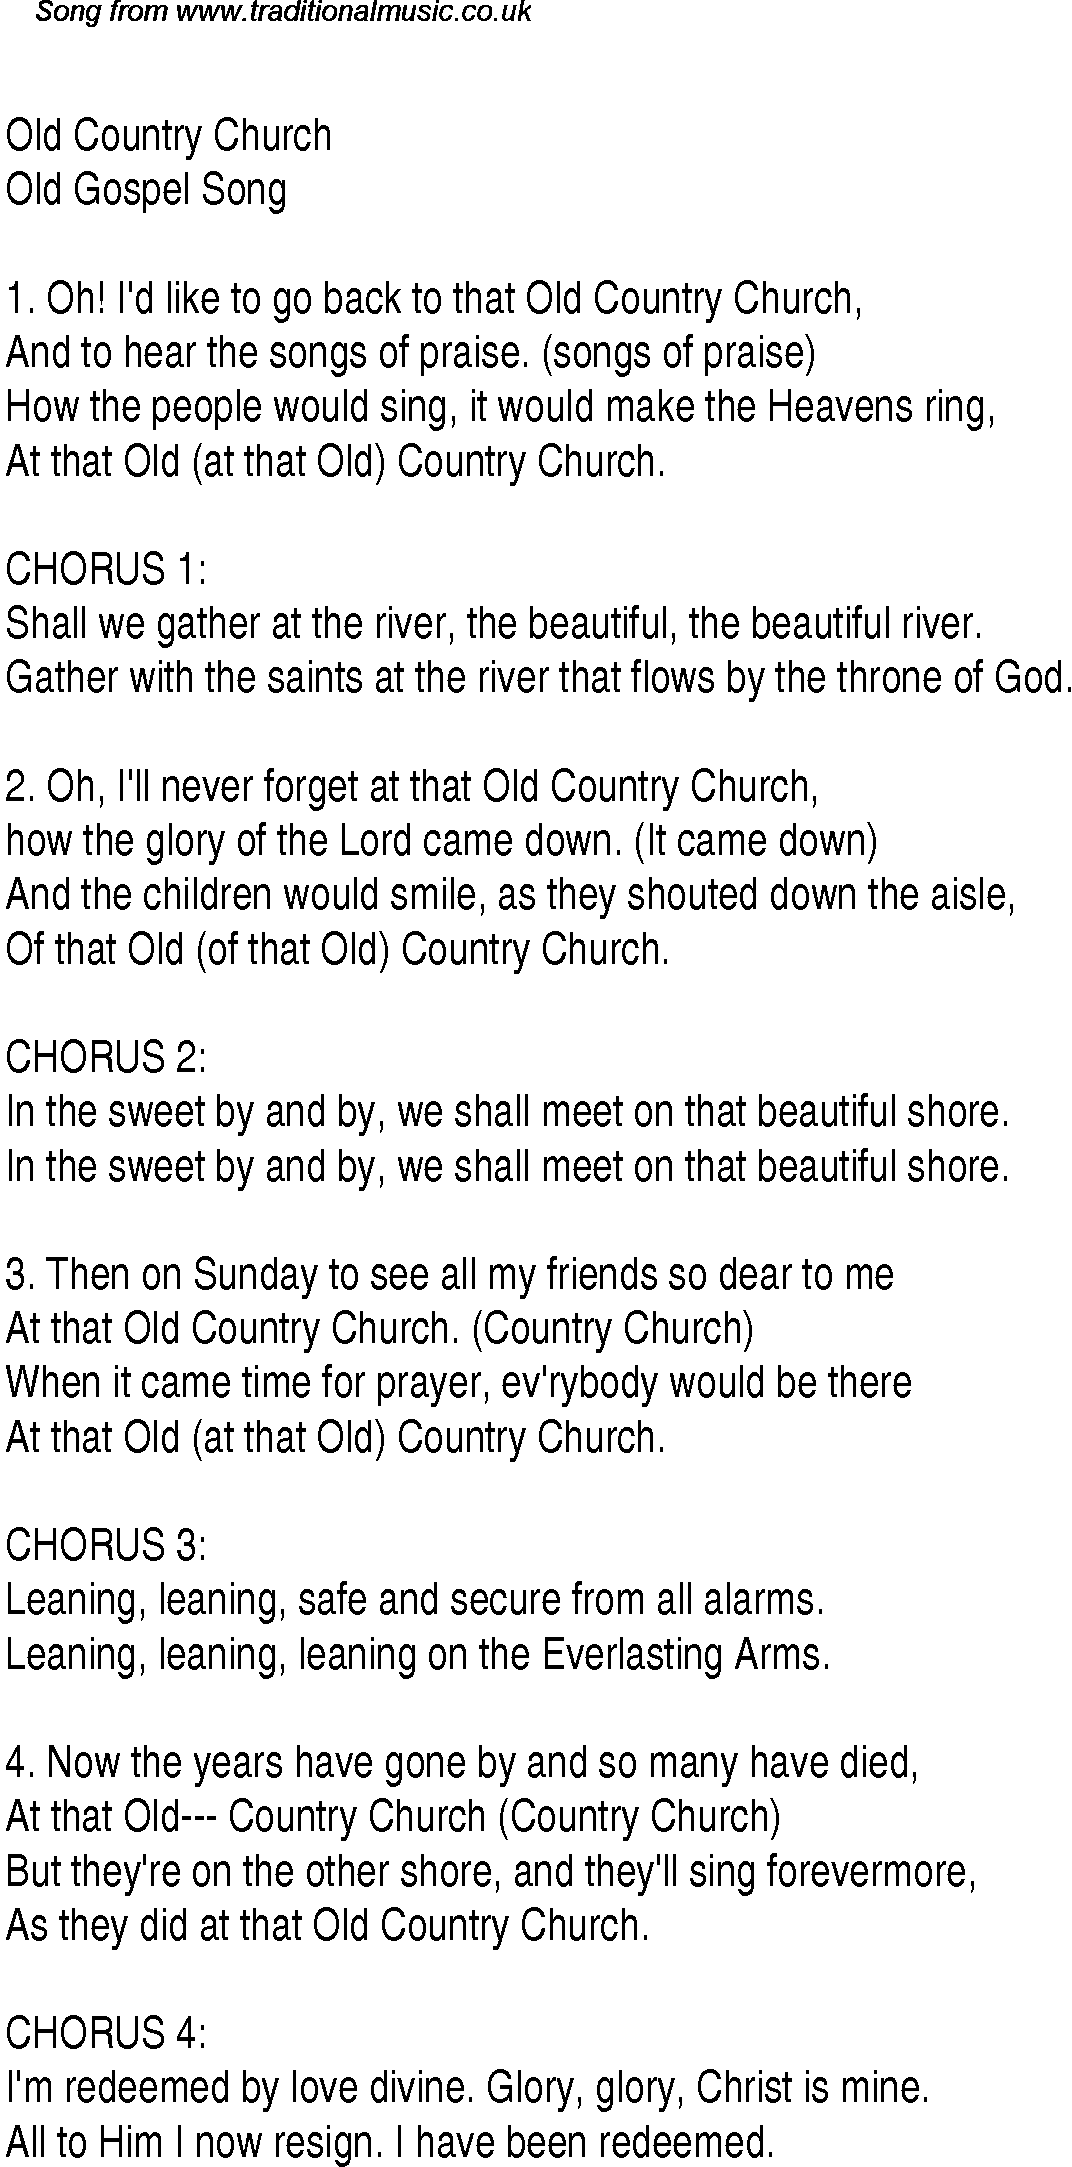 Gospel Song: old-country-church, lyrics and chords.